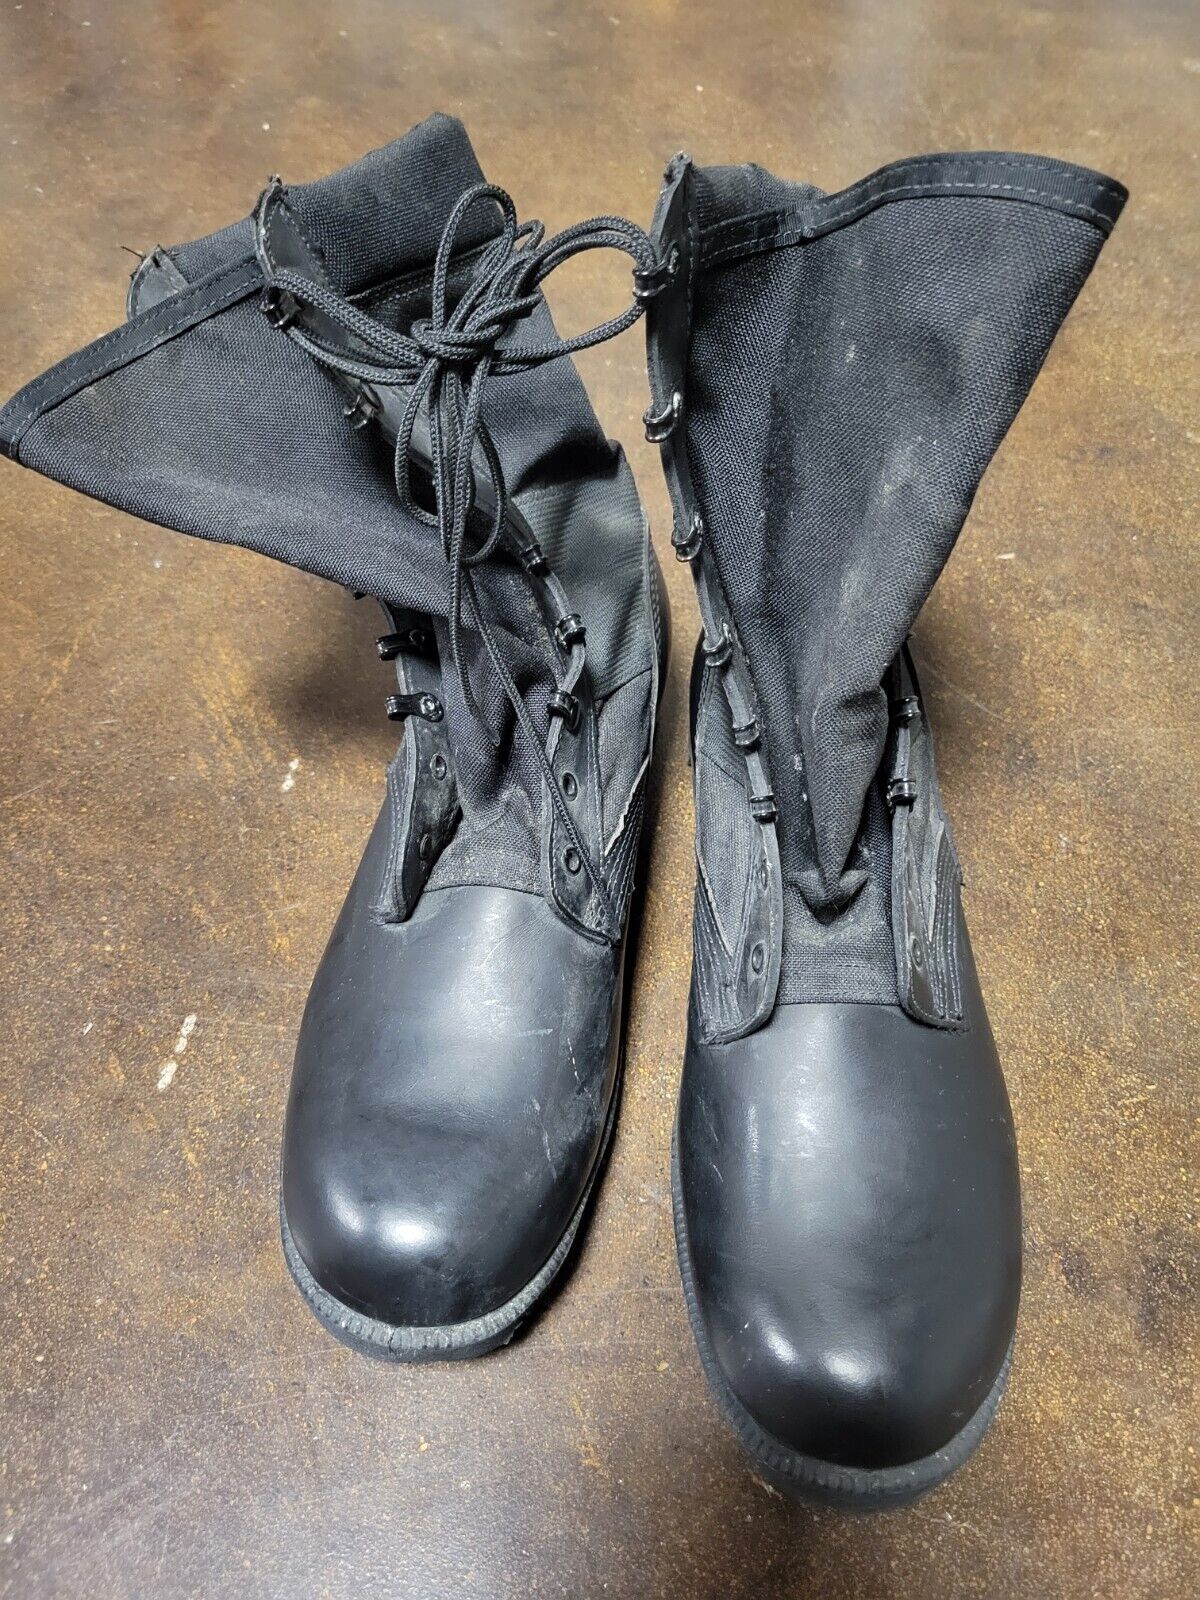 Unissued GI Spike Protective Jungle Boots